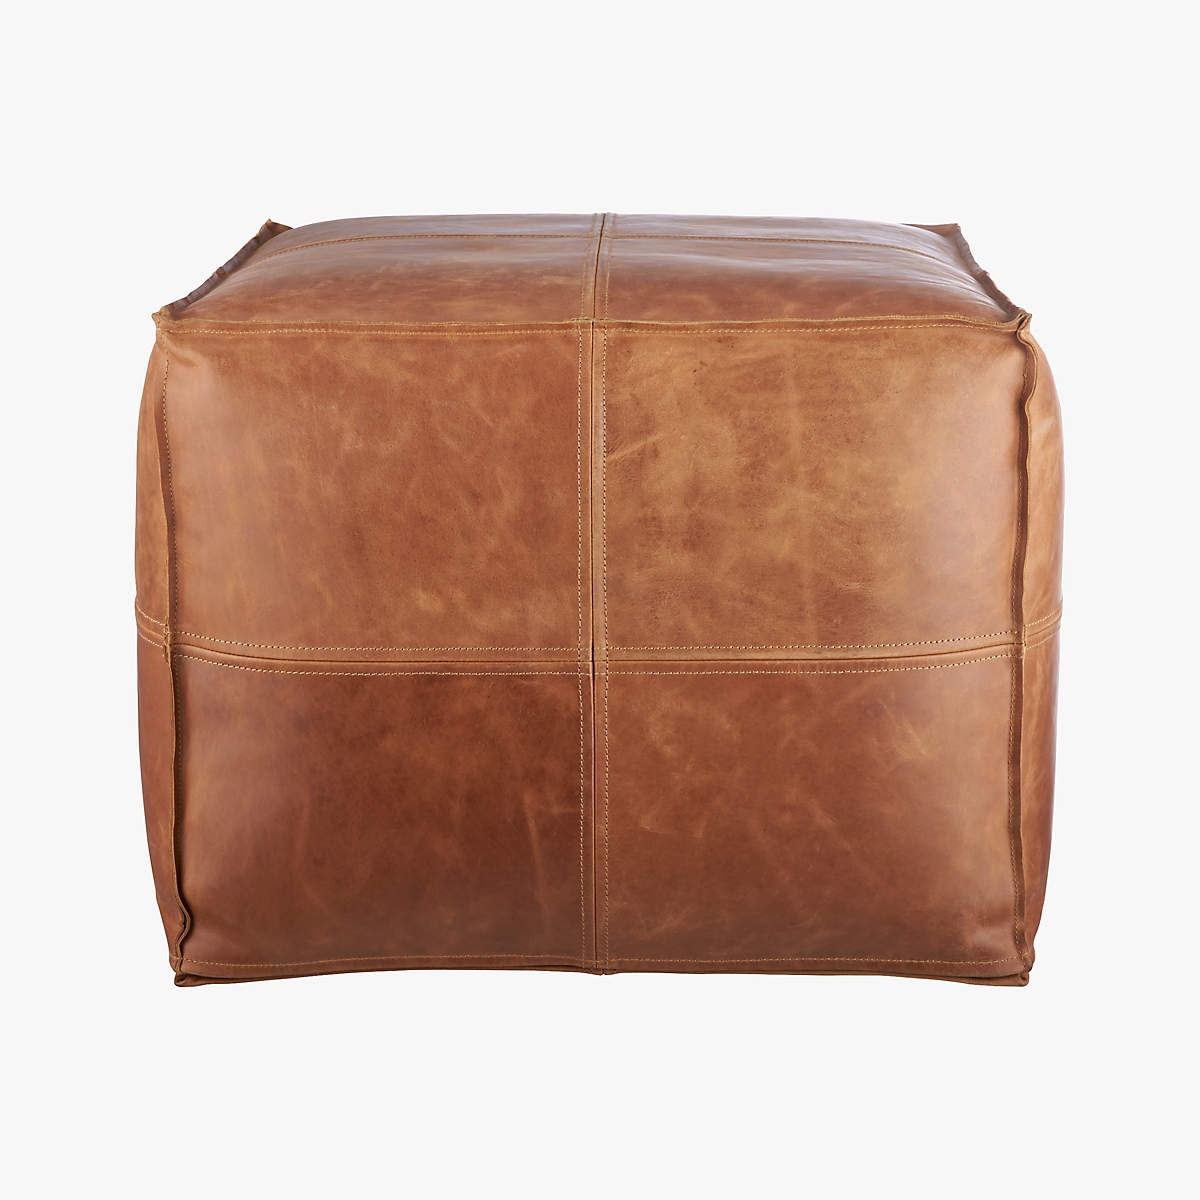 Leather Square Brown Pouf - Image 4